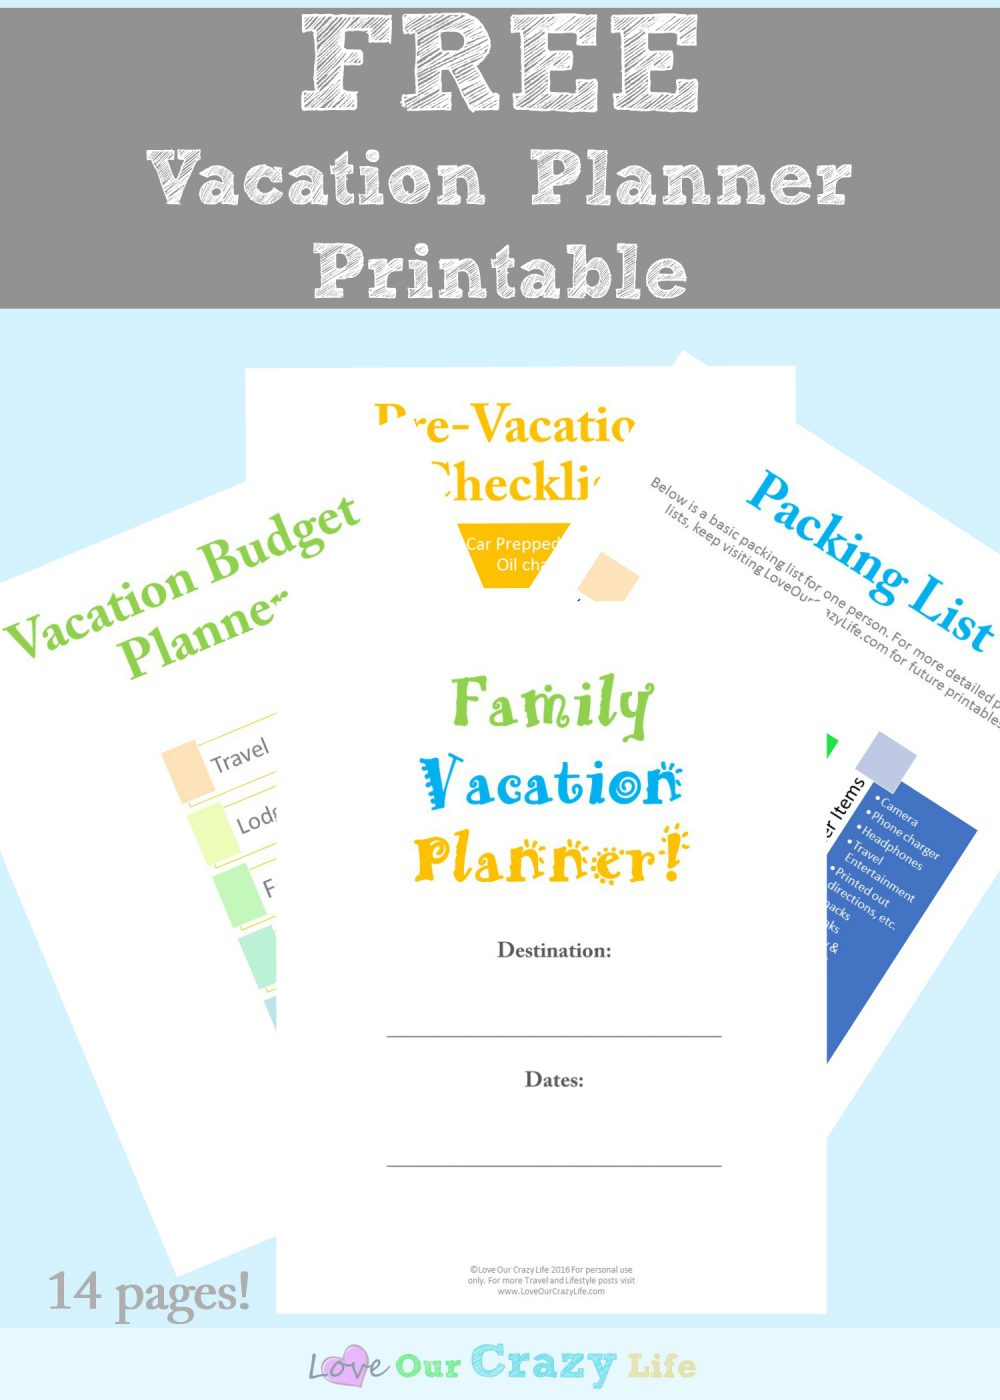 Family Vacation Planning Tips (Free Planner) | This Crazy Adventure - Free Printable Trip Planner